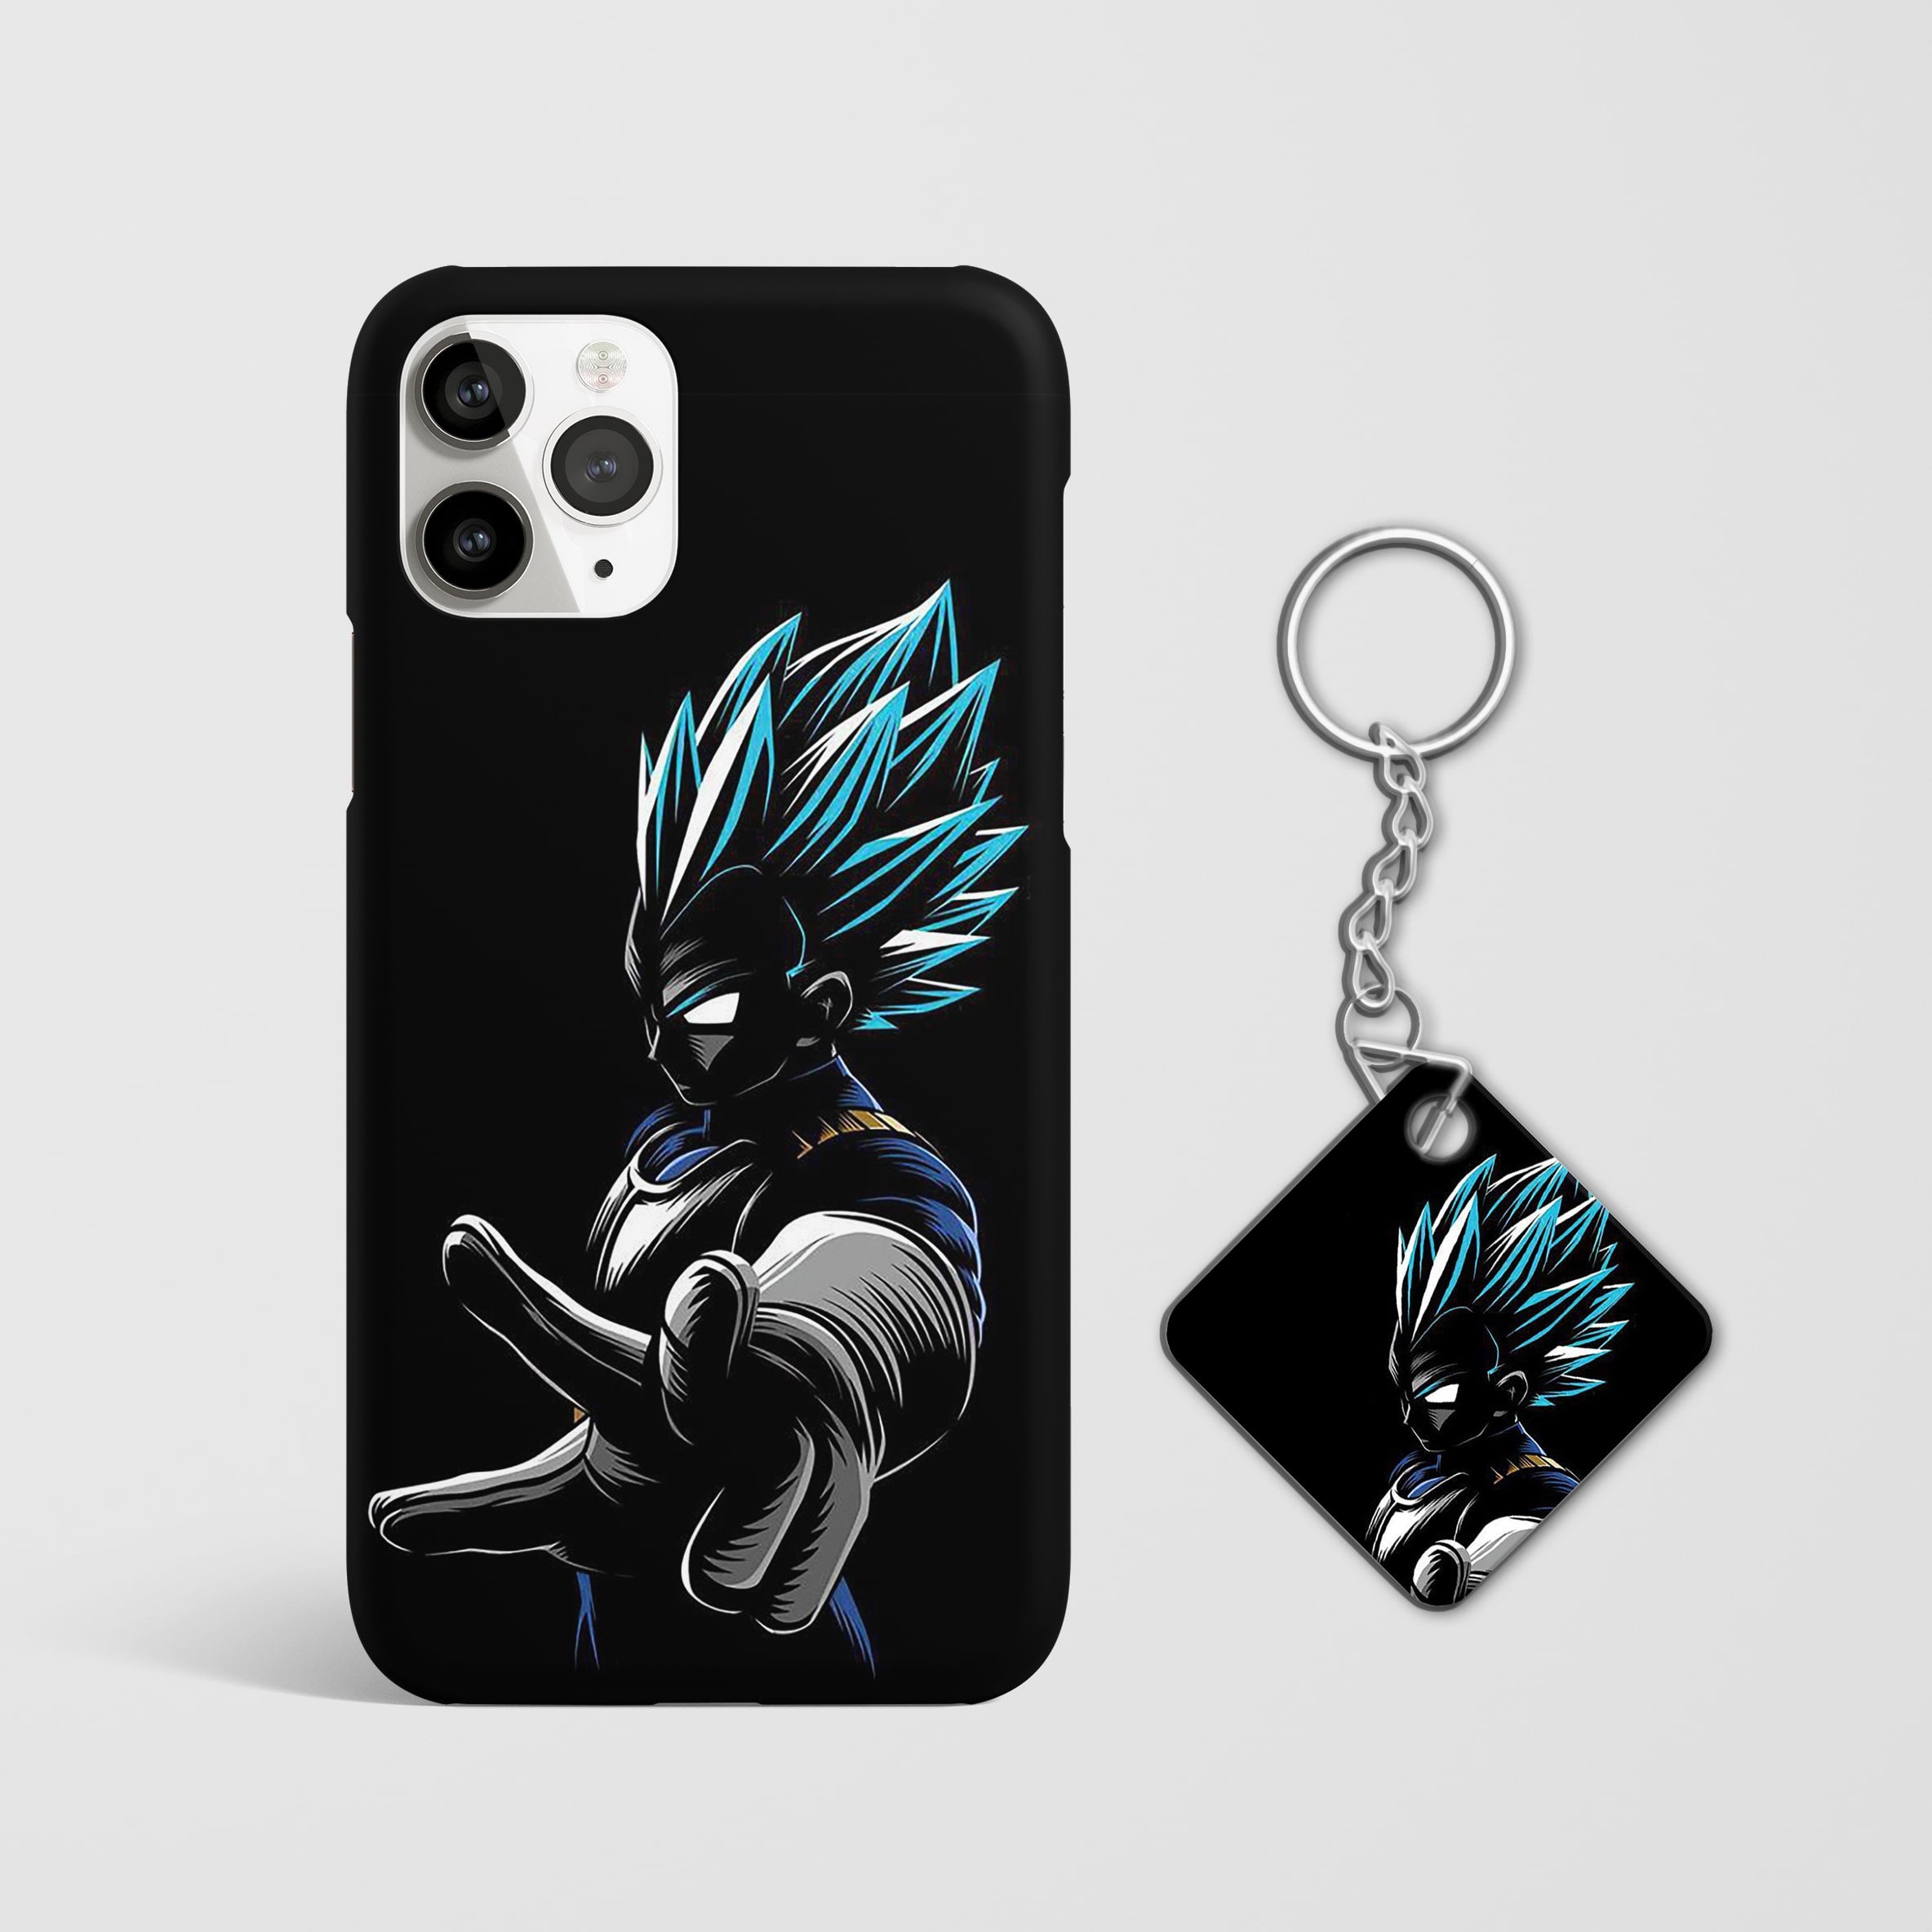 Close-up of the simple yet striking Vegeta design on phone case with Keychain.